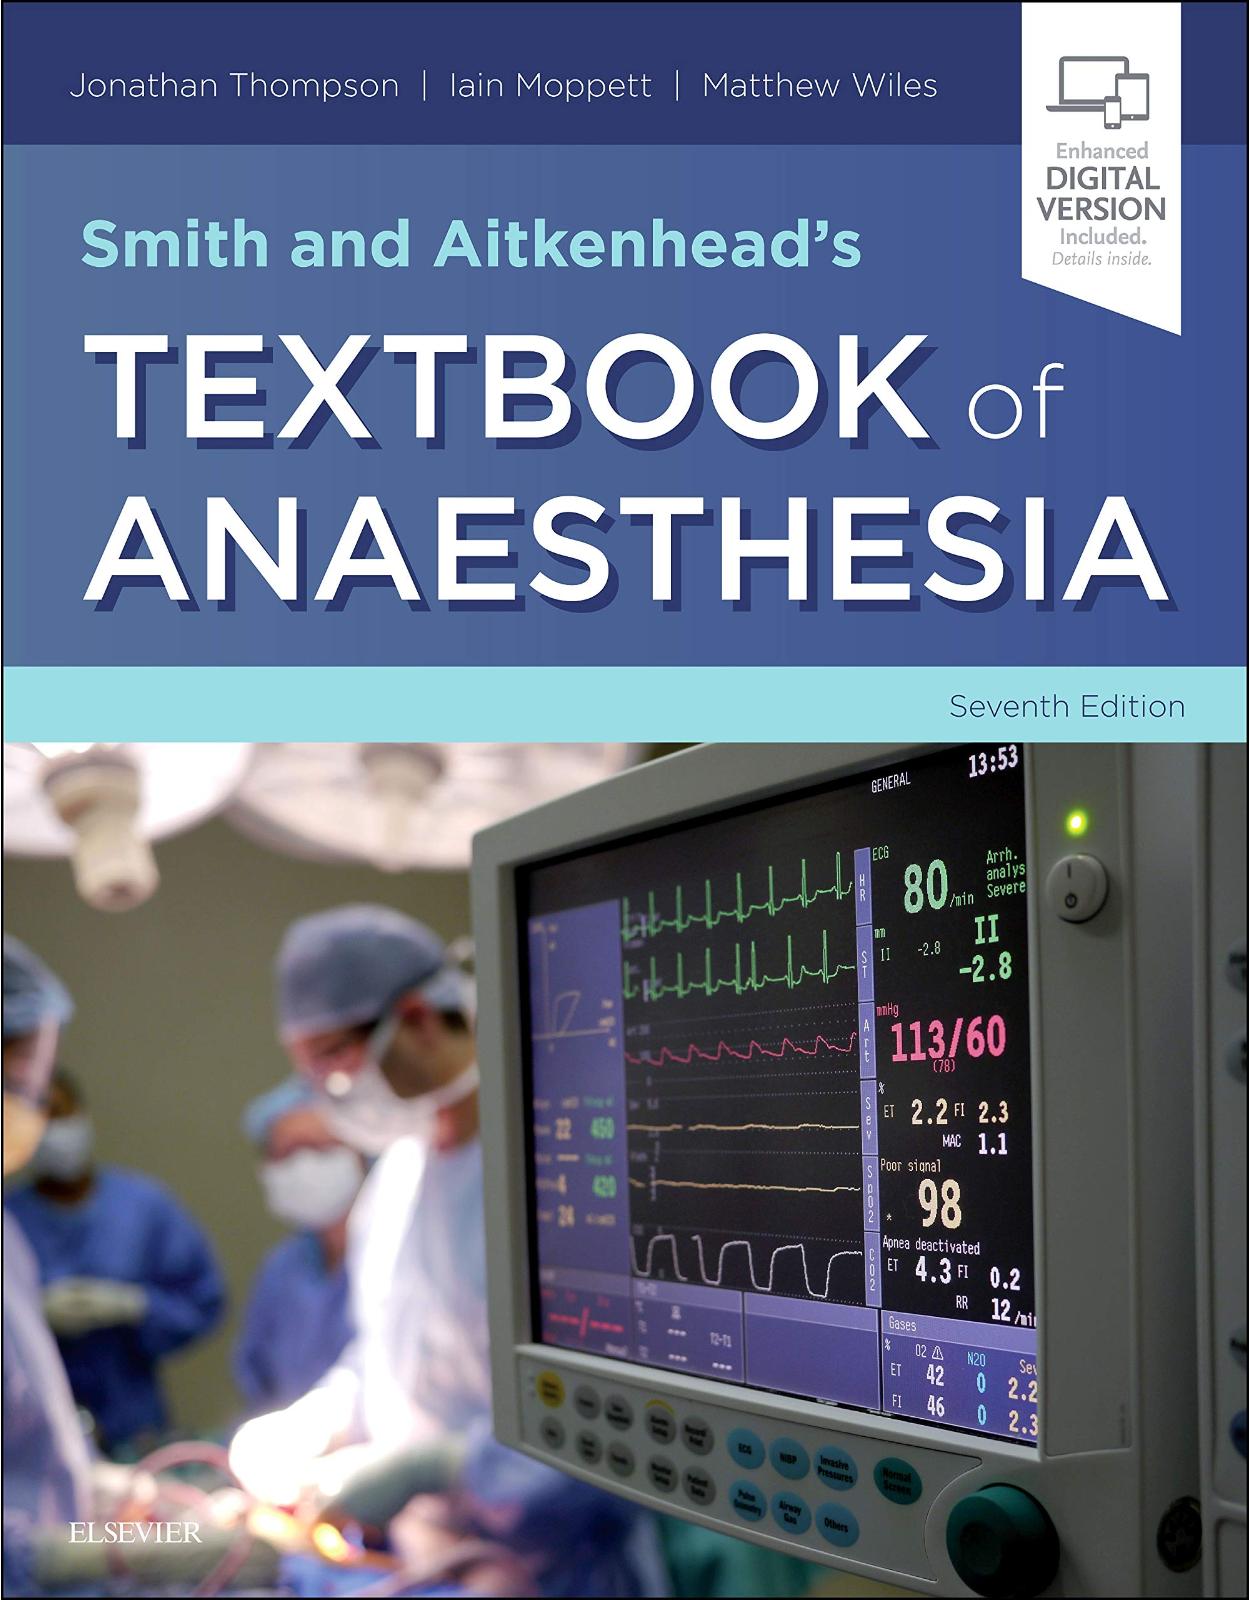 Smith and Aitkenhead’s Textbook of Anaesthesia, 7e: Expert Consult - Online & Print